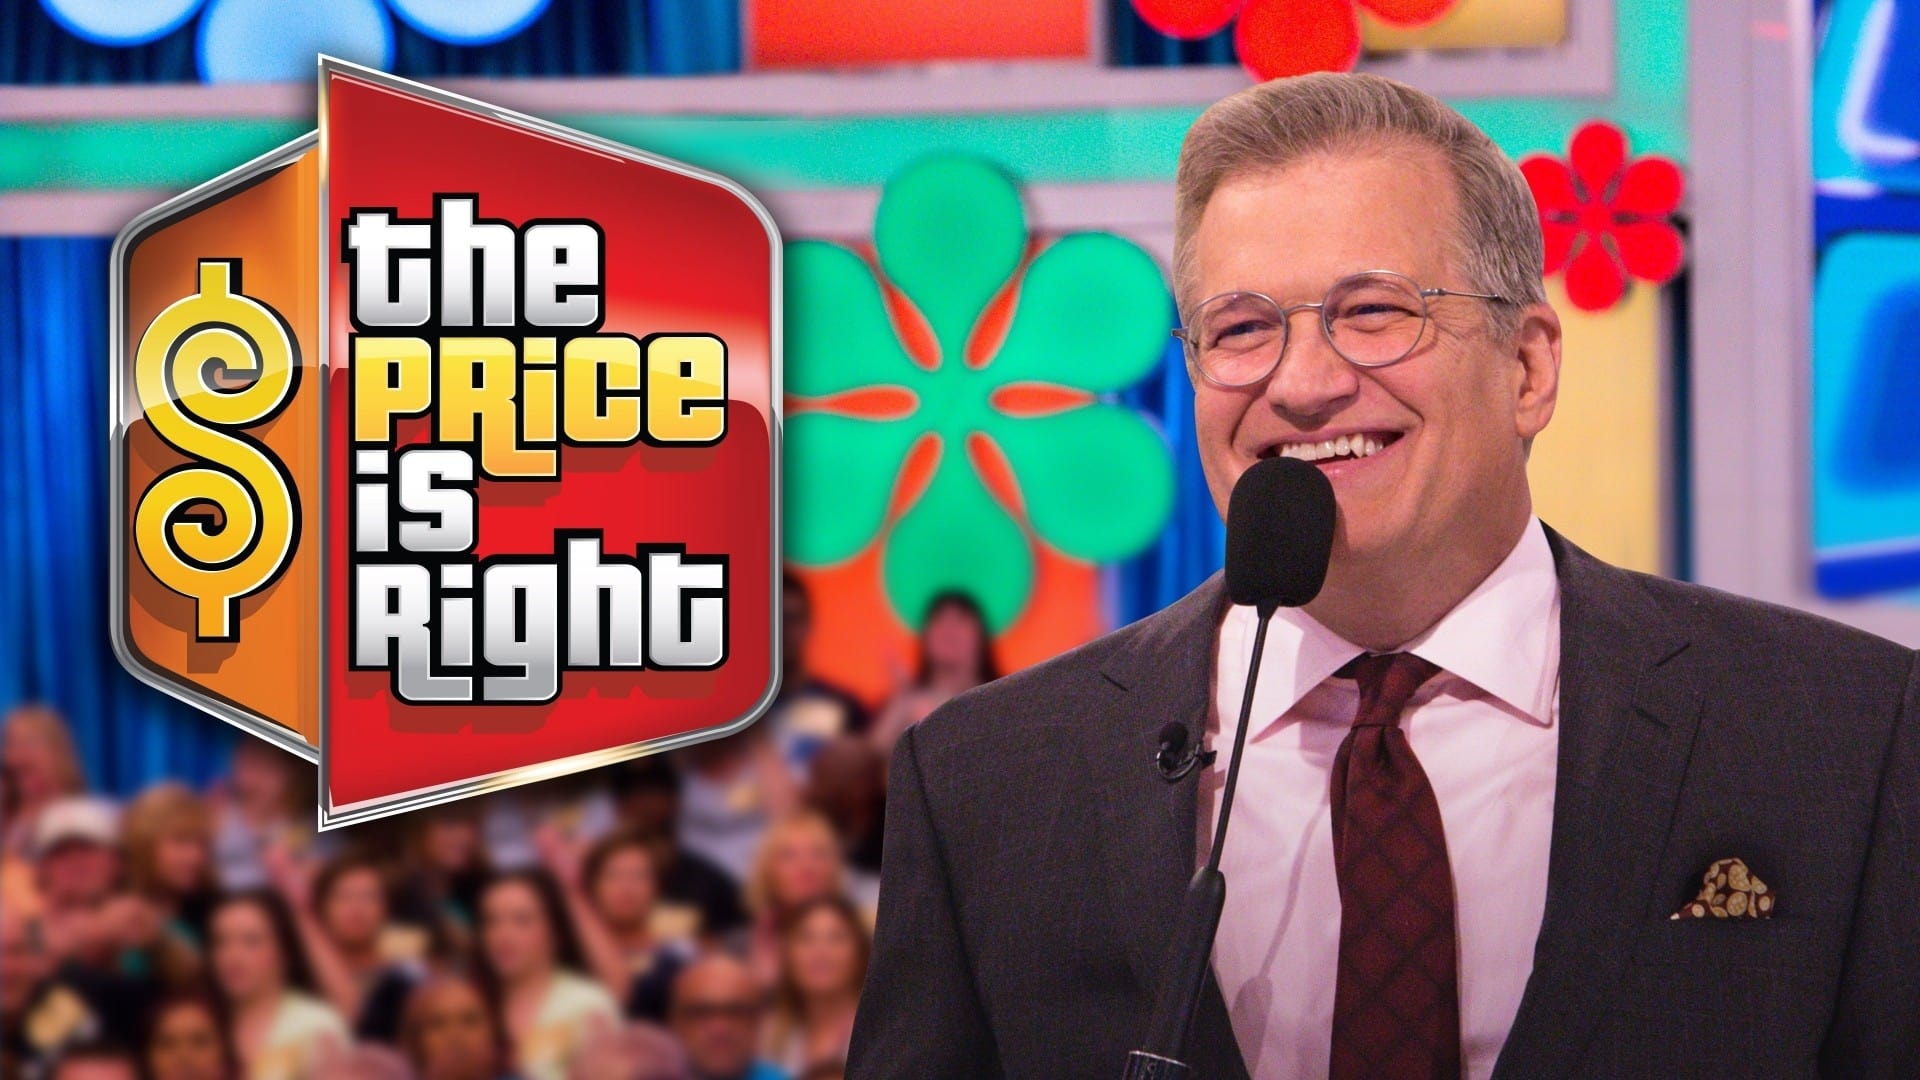 The Price Is Right - Season 3 Episode 195 : The Price Is Right Season 3 Episode 195